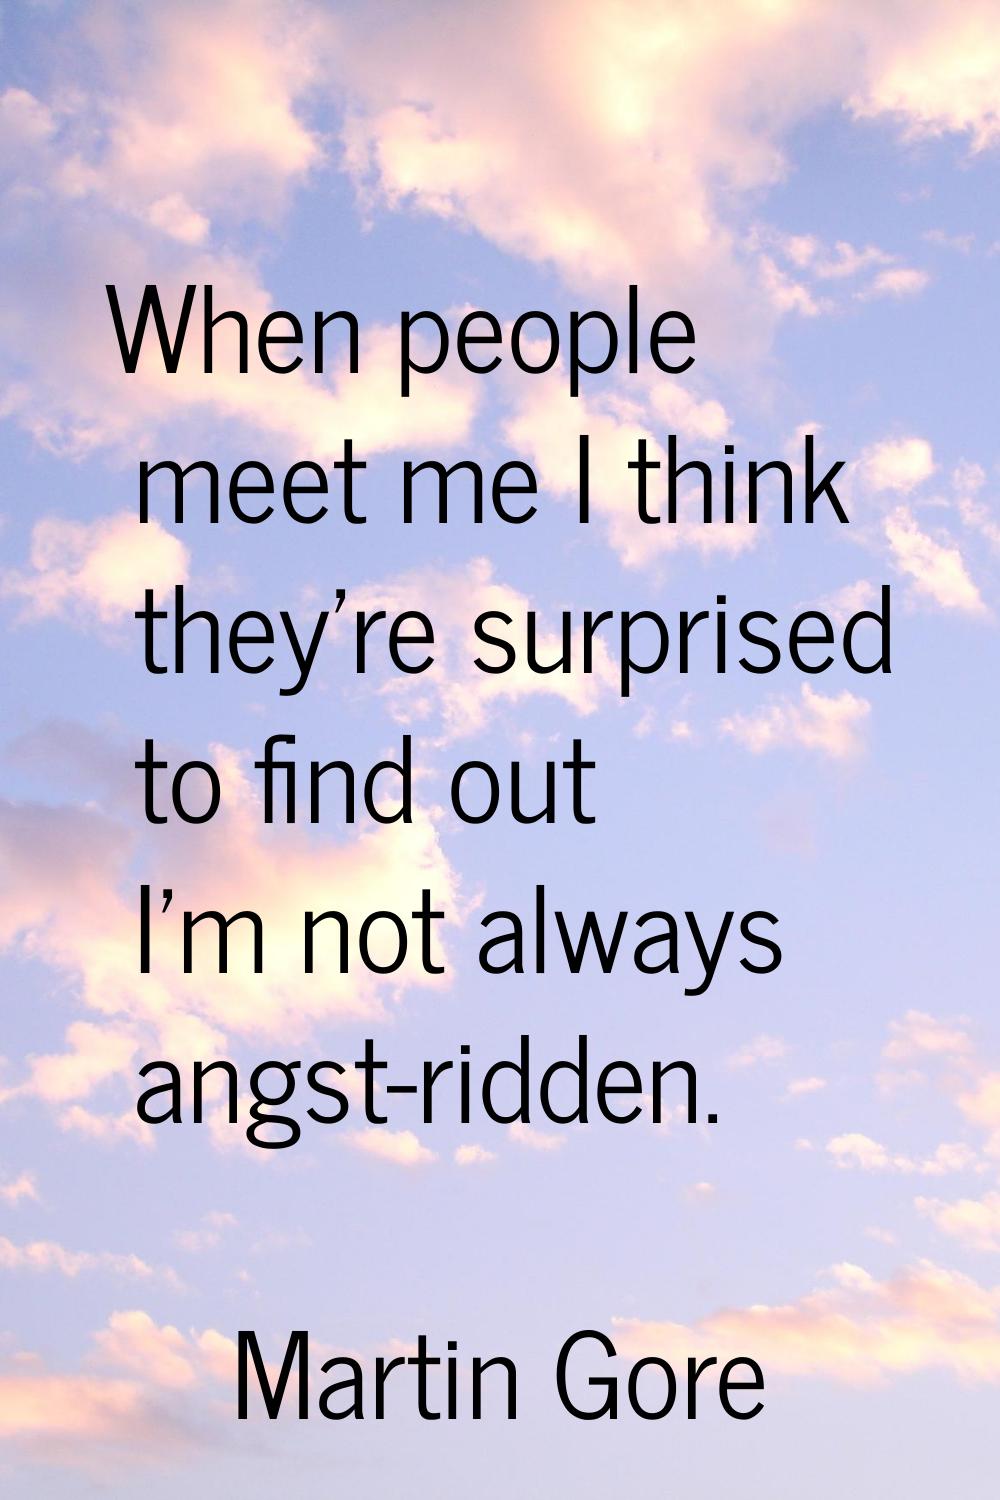 When people meet me I think they're surprised to find out I'm not always angst-ridden.